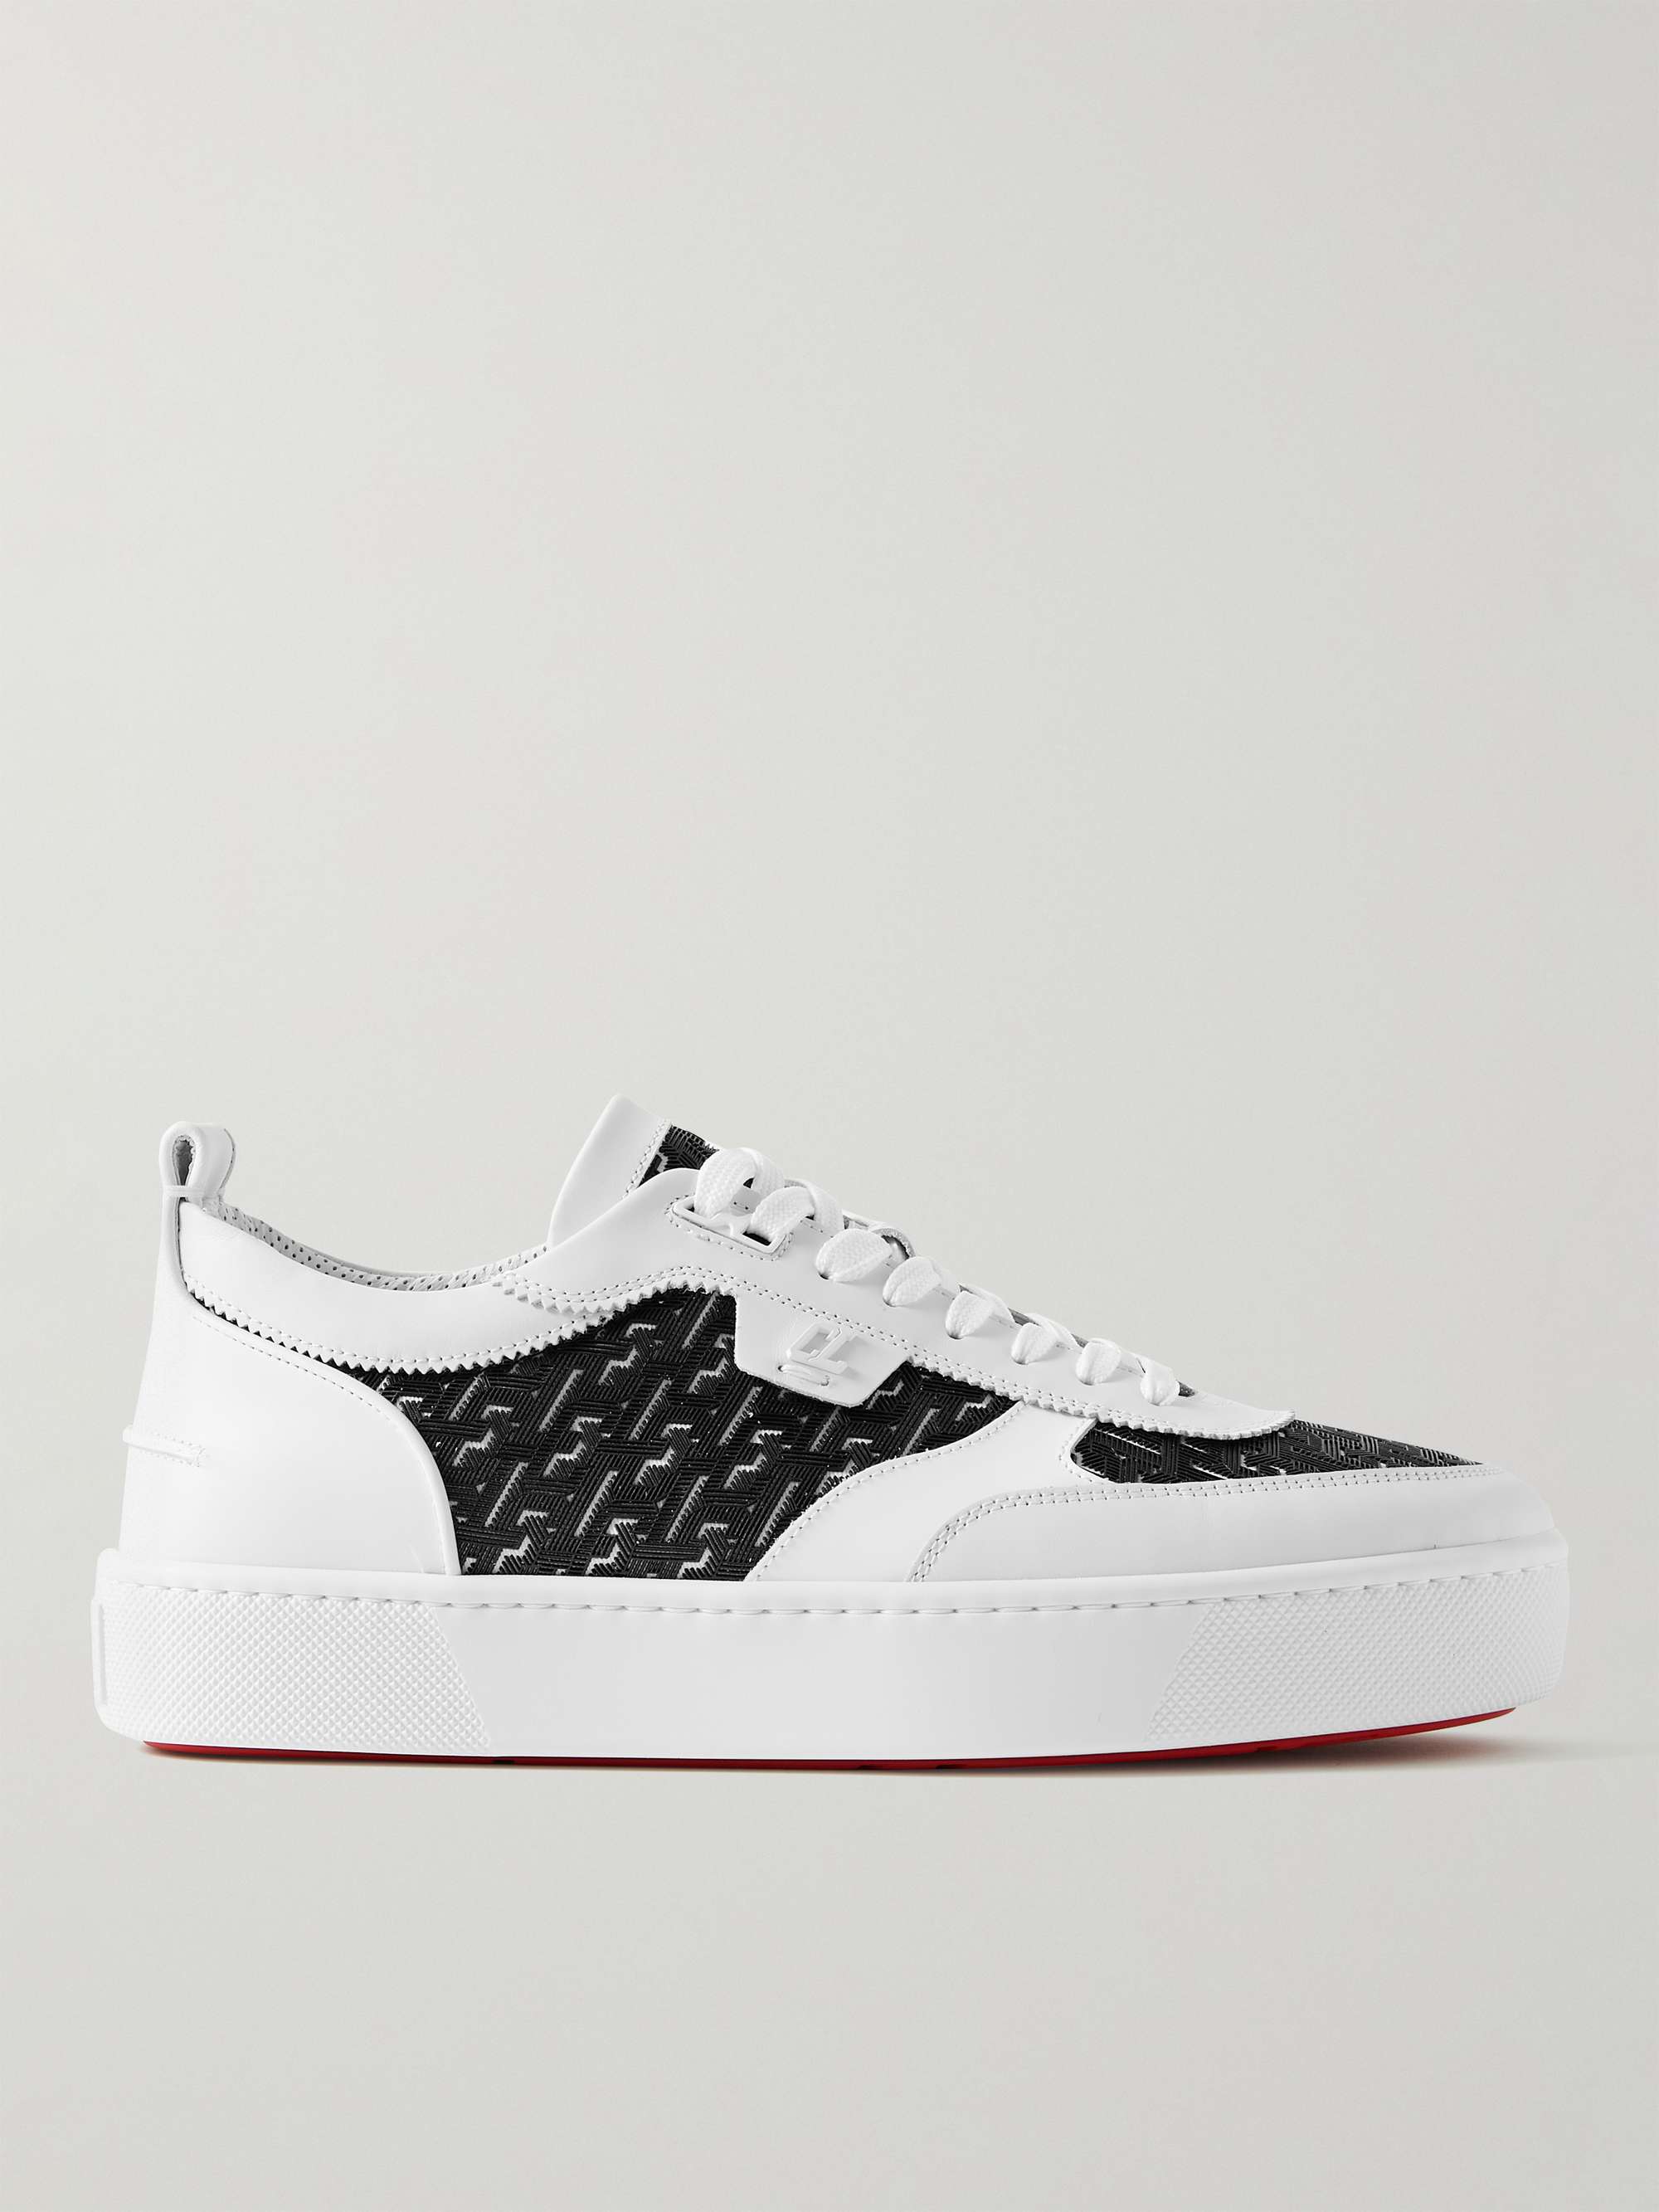 Christian Louboutin Louis Junior Spikes Mesh & Leather Sneaker - ShopStyle